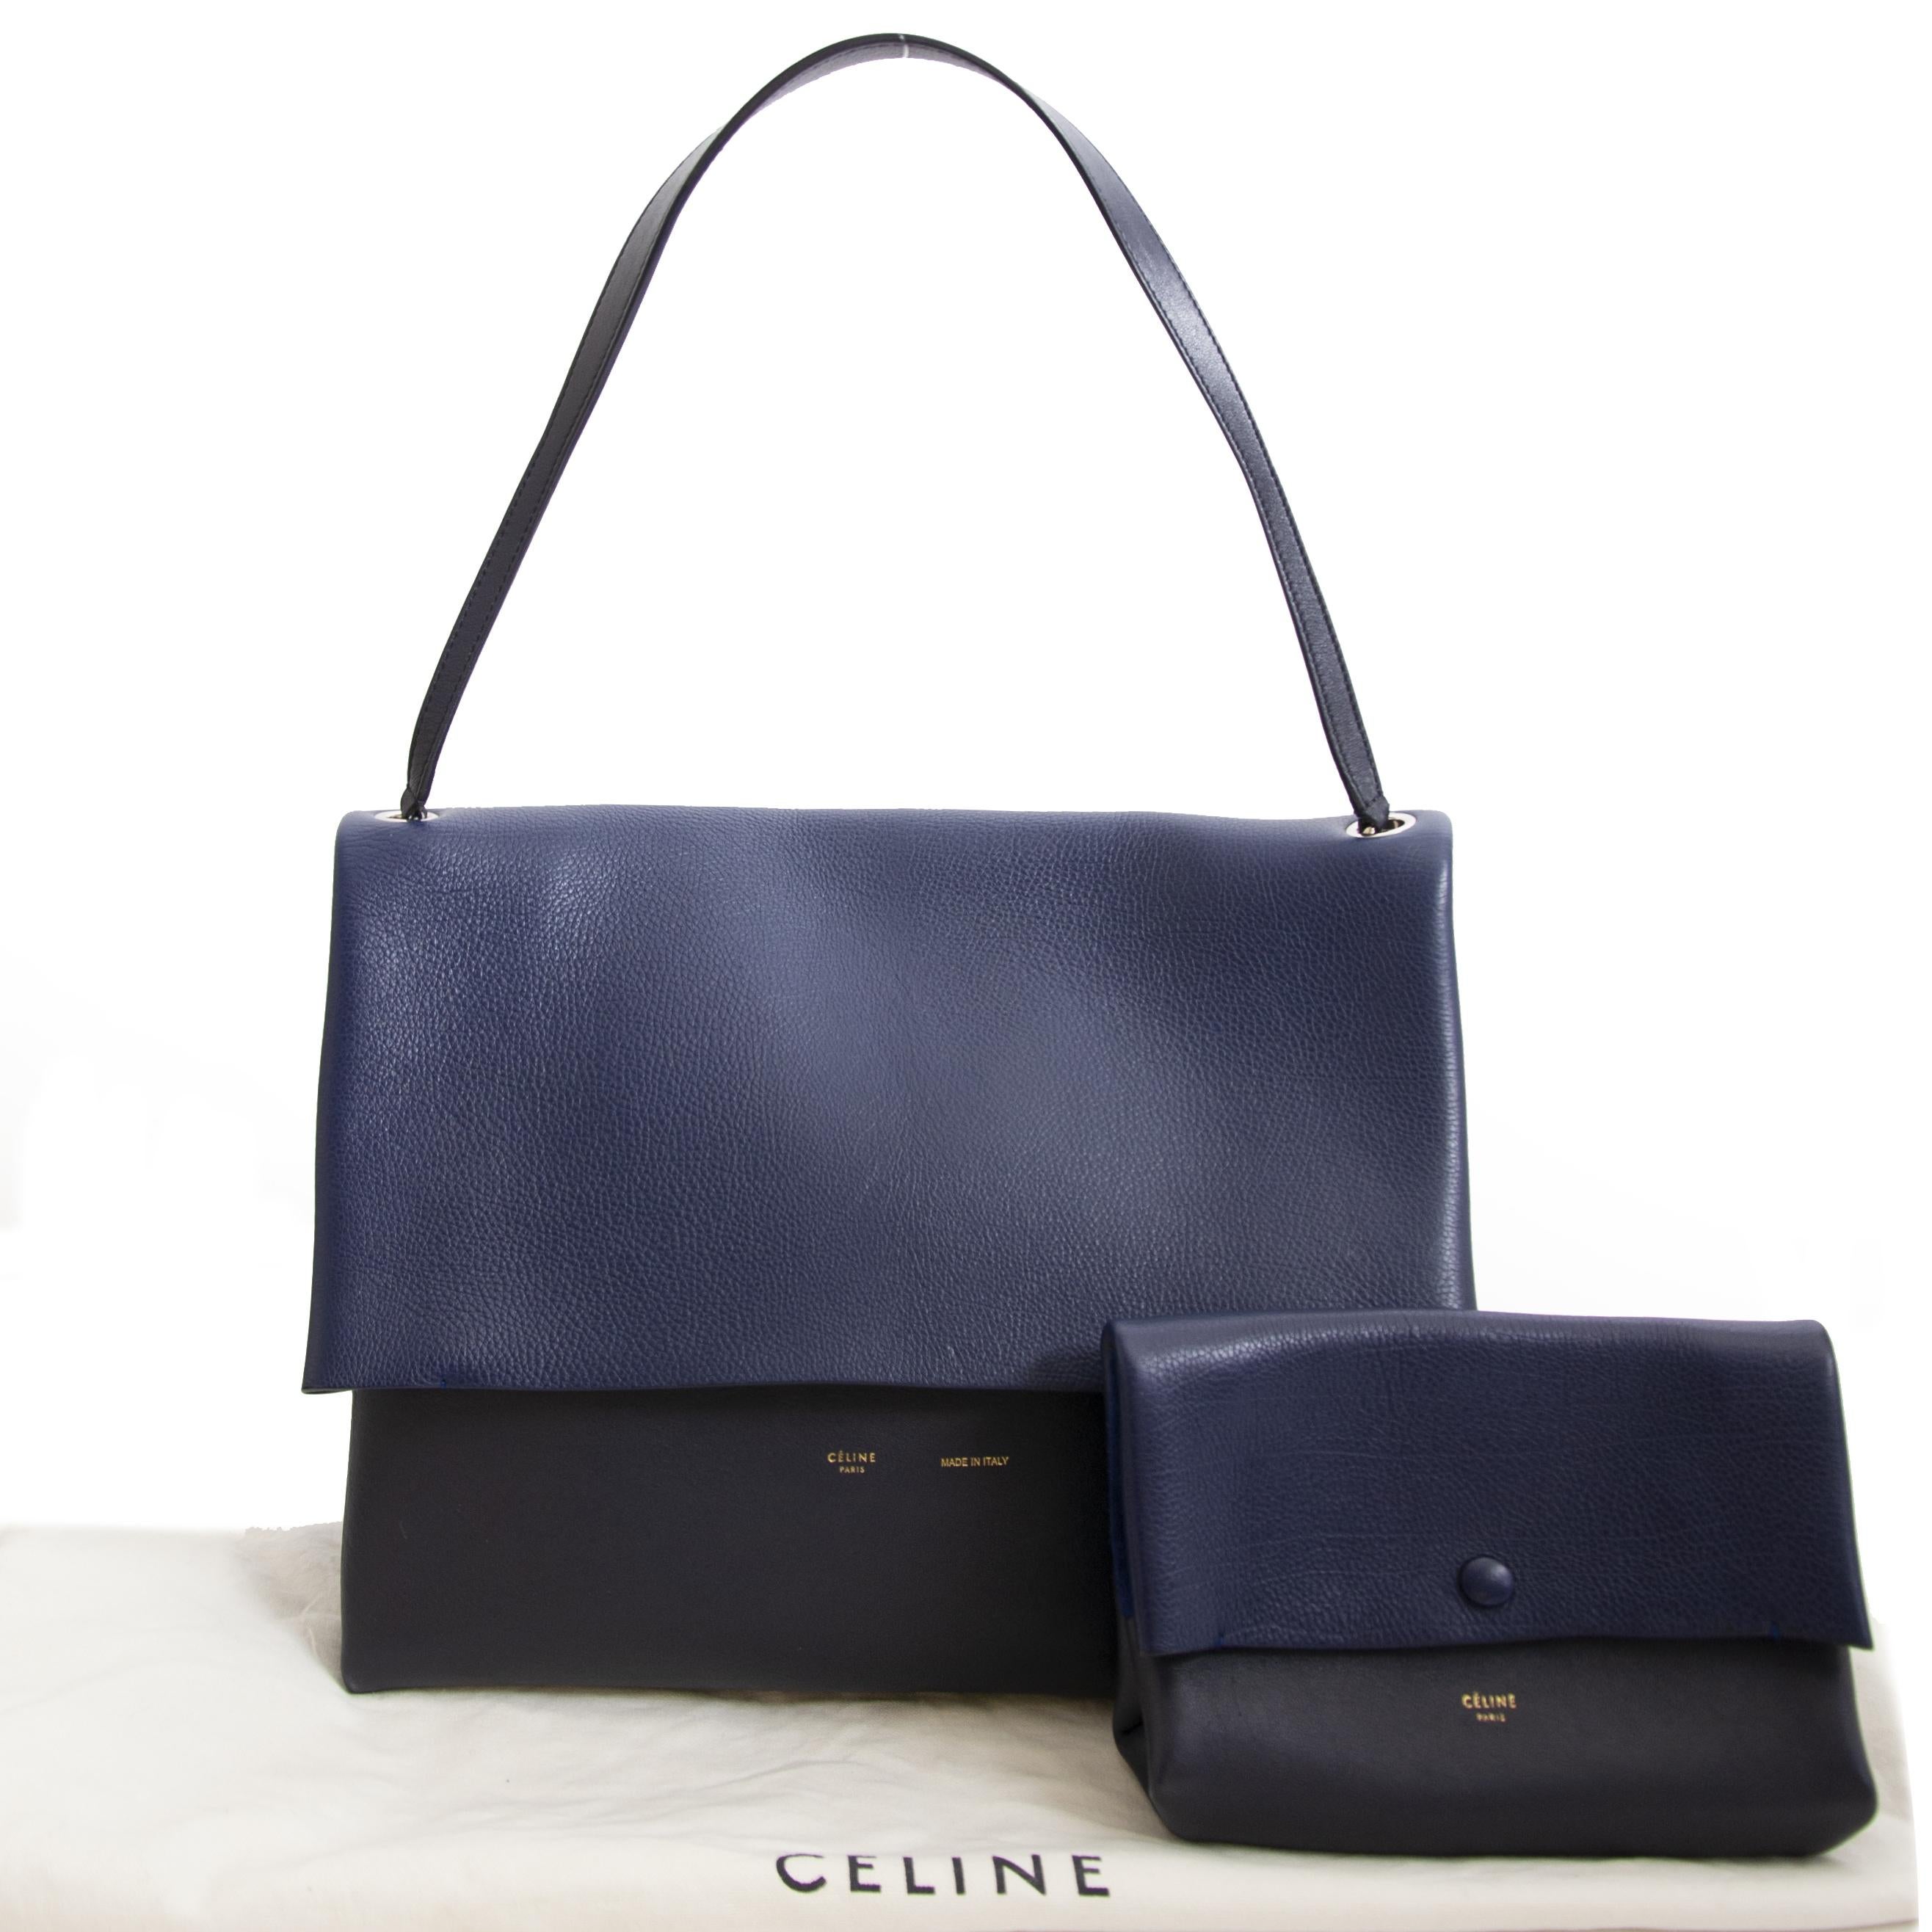 Good condition



Celine Colorblocked Leather Shoulder Bag



Feeling blue? No need to worry because this blue duotoned Celine bag will fill you with joy. It's the perfect bag for a day out because it will fit all our essentials. Combine with a